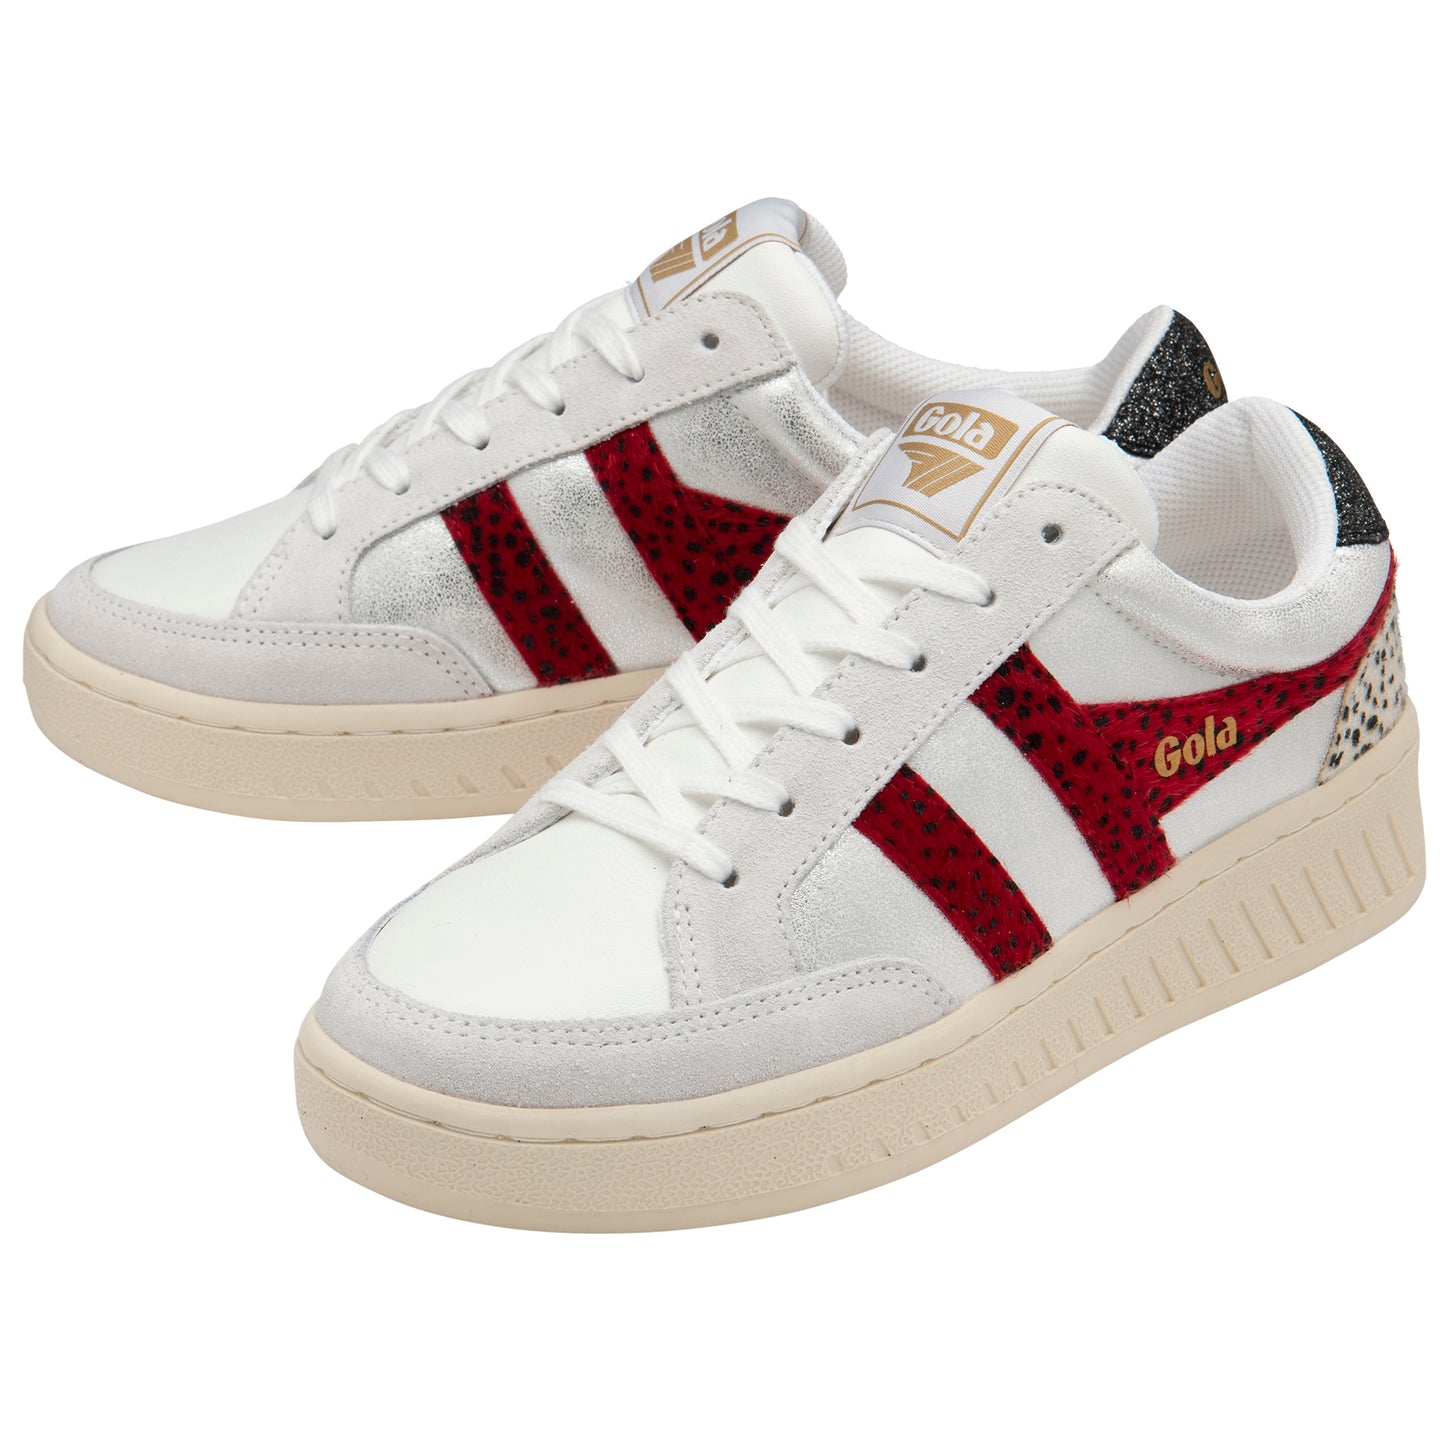 Gola Superslam White/Silver/Red Trainers